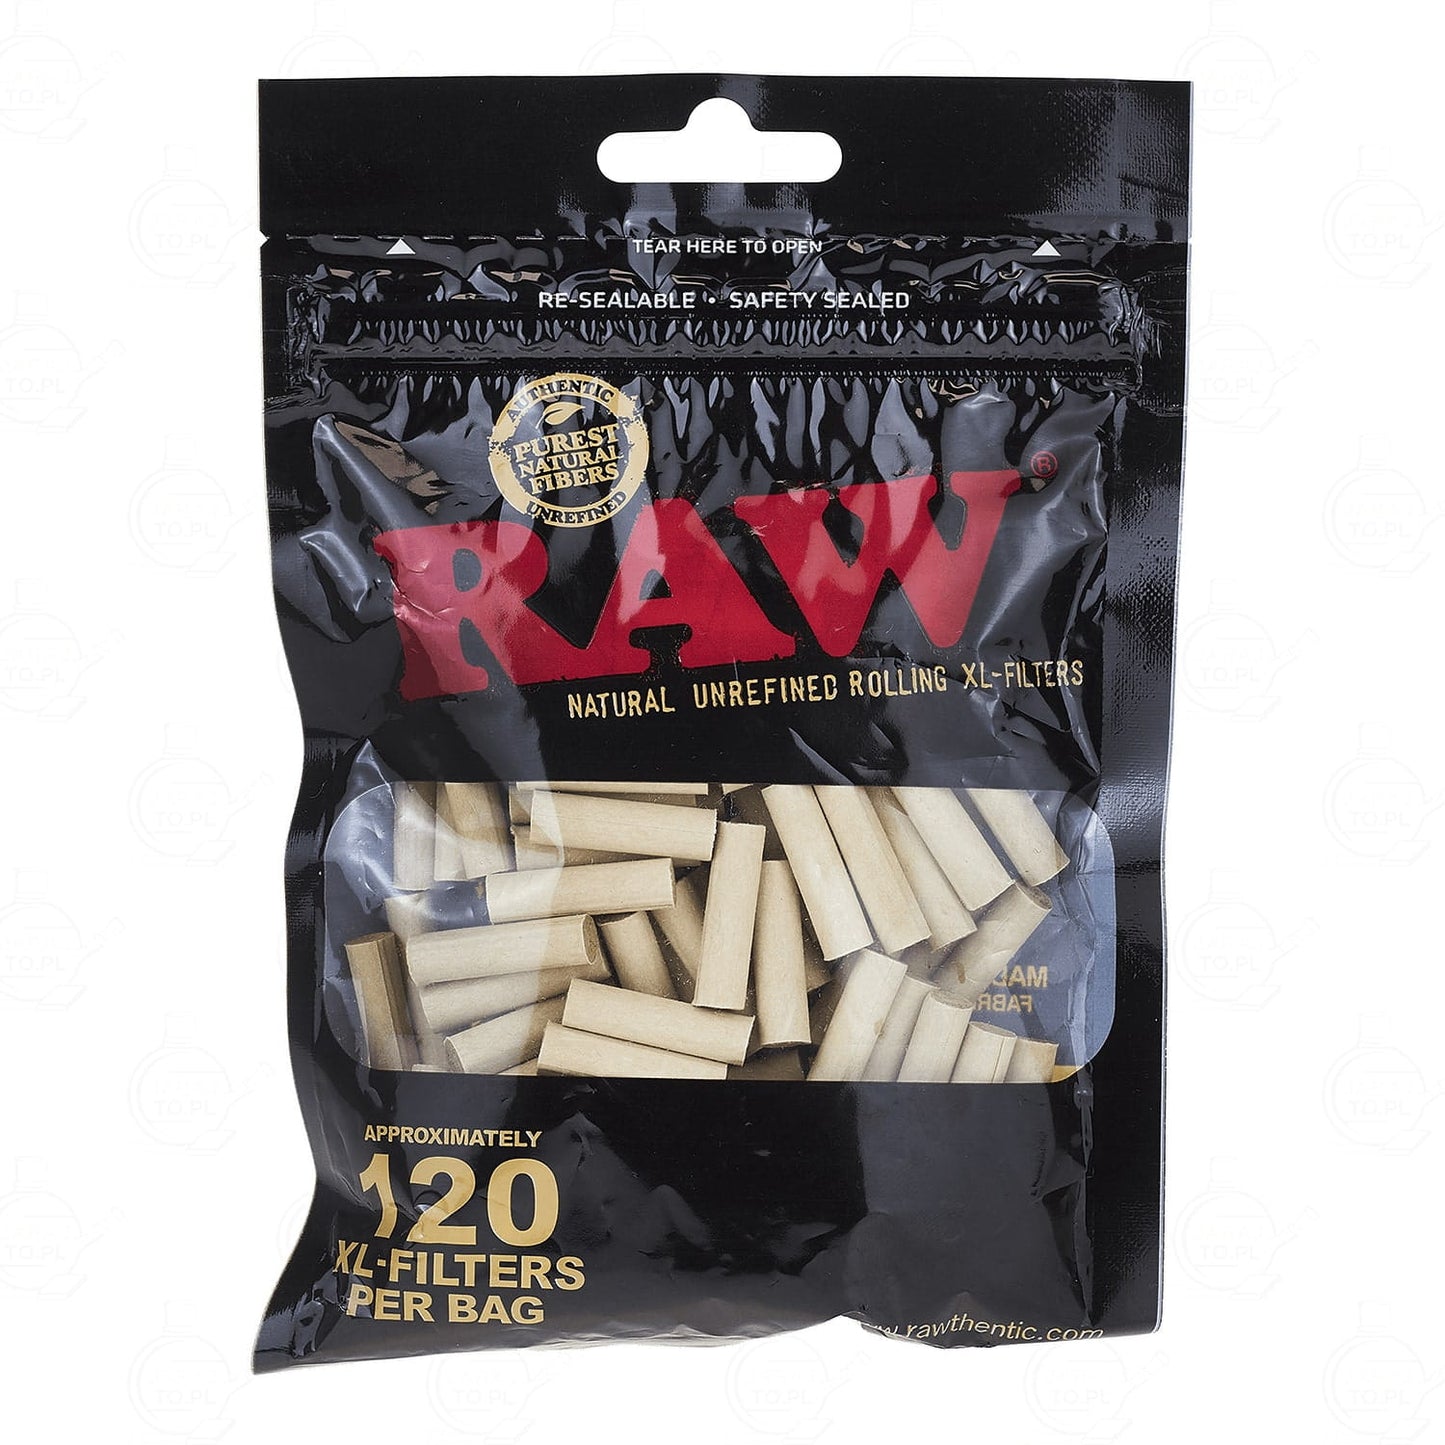 RAW Natural Unrefined Rolling XL Filters Black